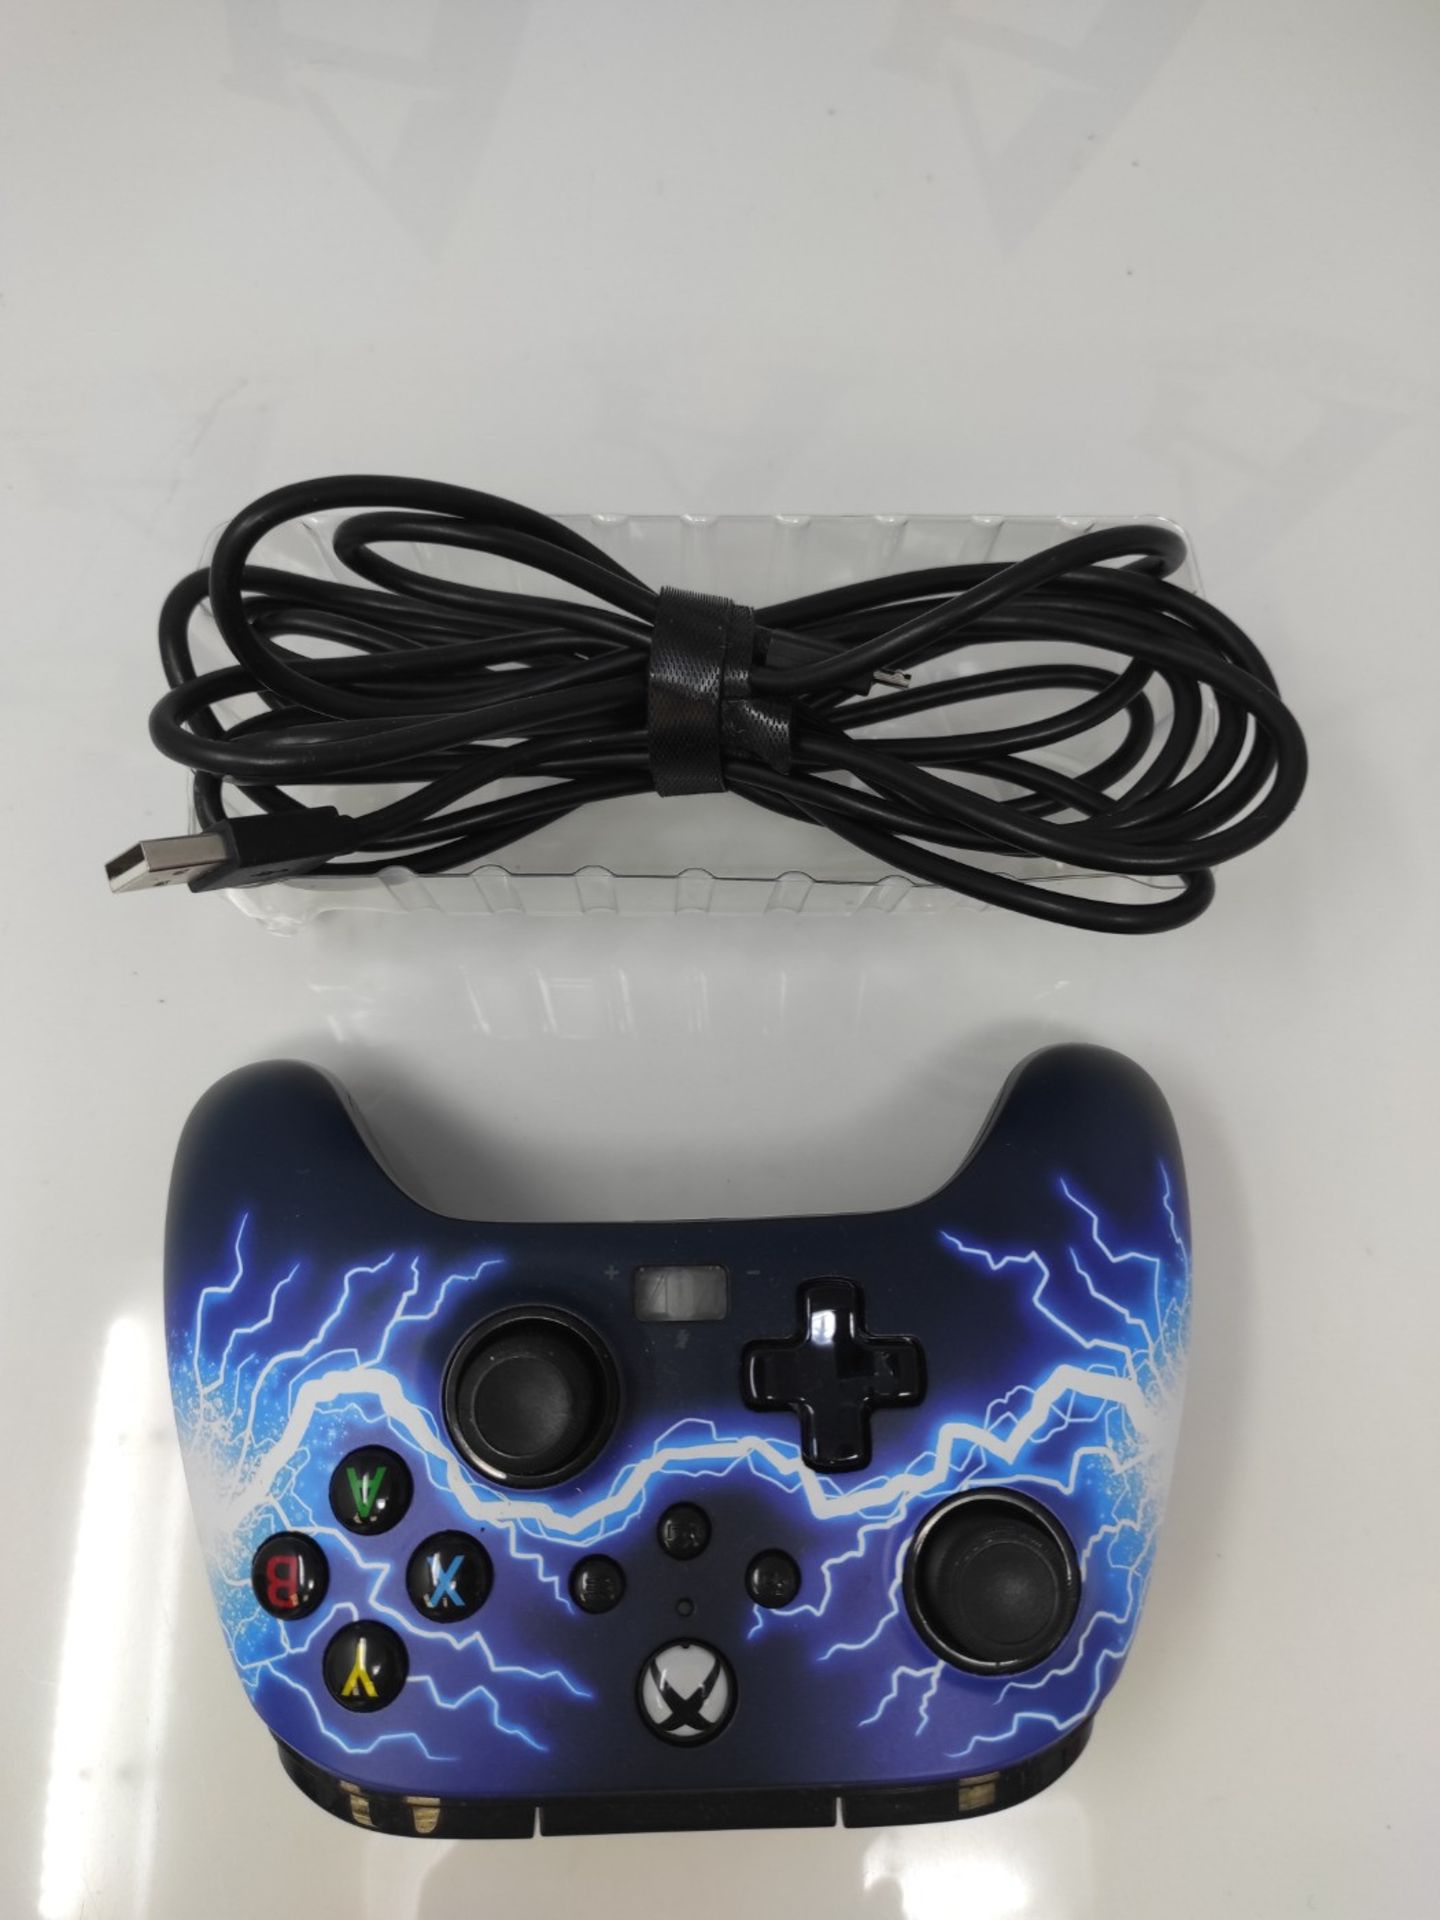 Power A, PowerA wired controller for Xbox Series X|S: Arc Lightning - Image 3 of 3